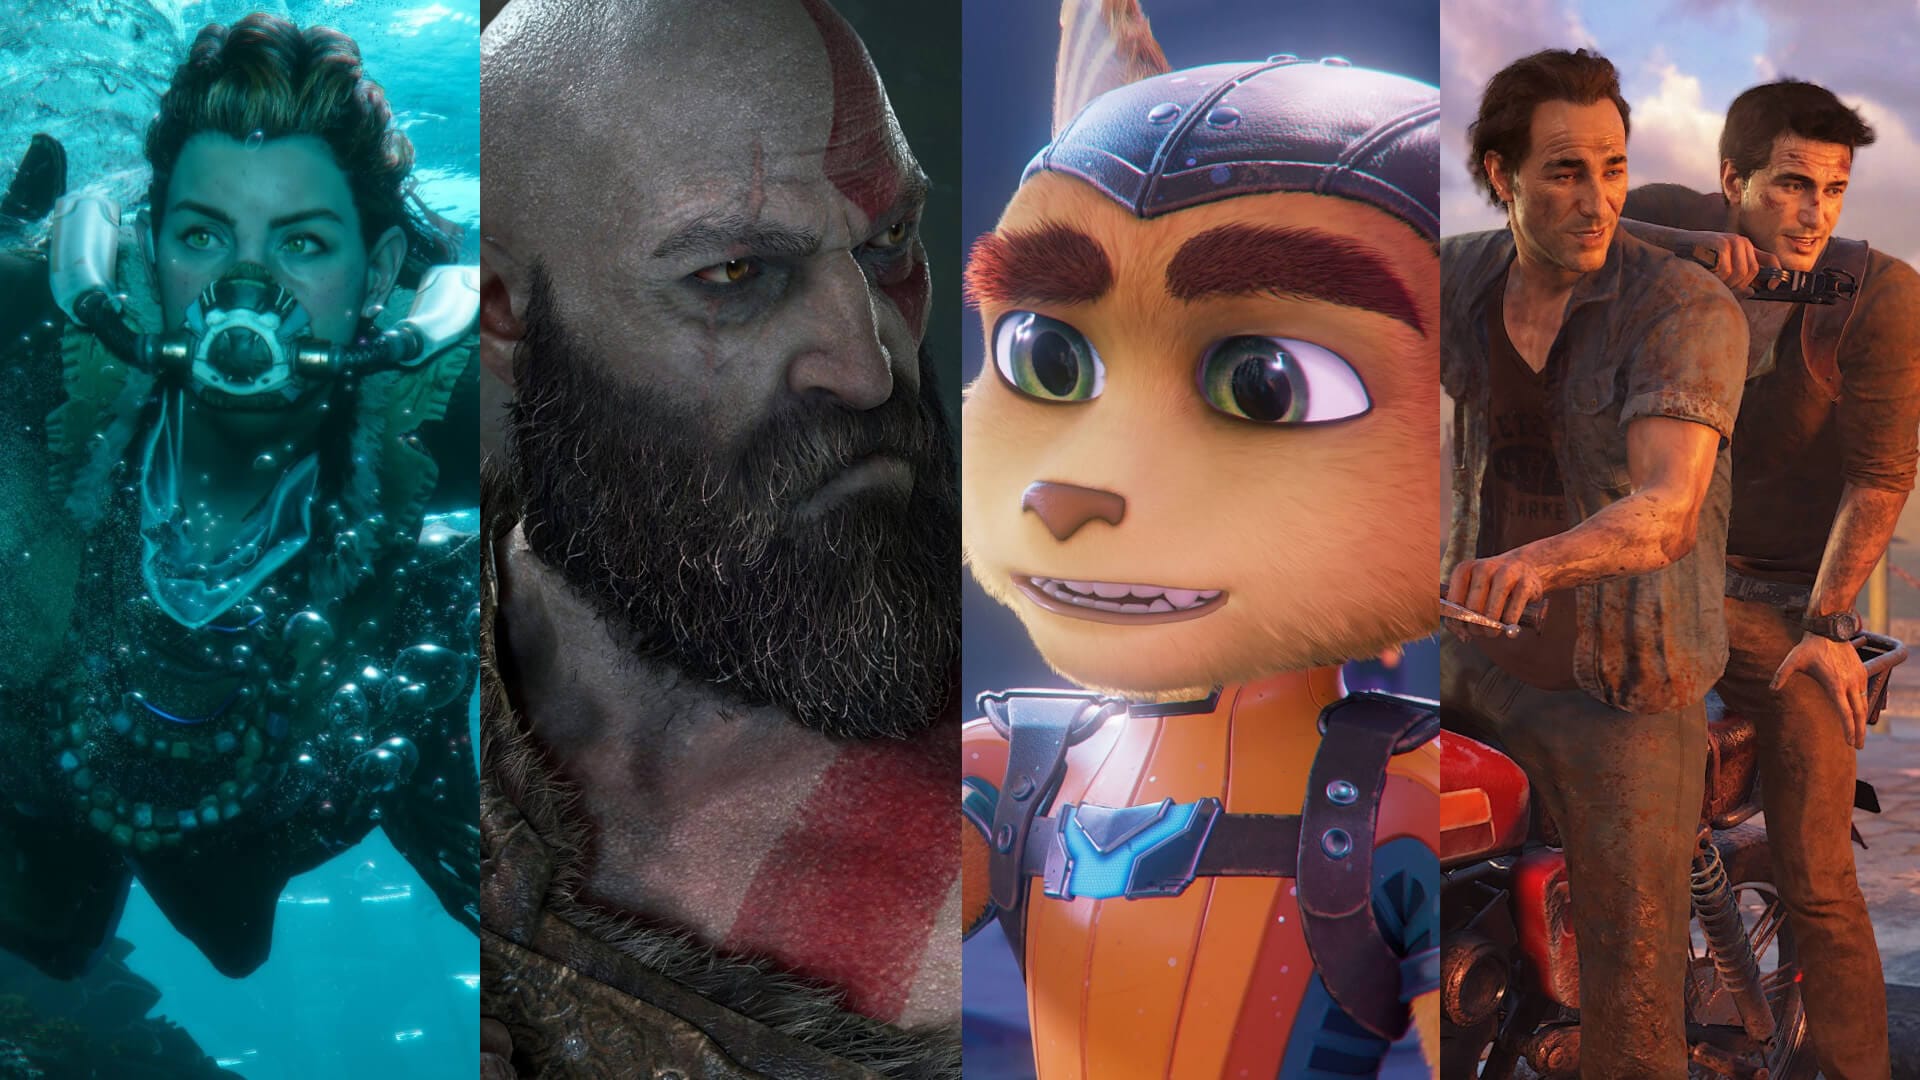 Aloy, Kratos, Ratchet, and the Drake brothers from several PlayStation IPs